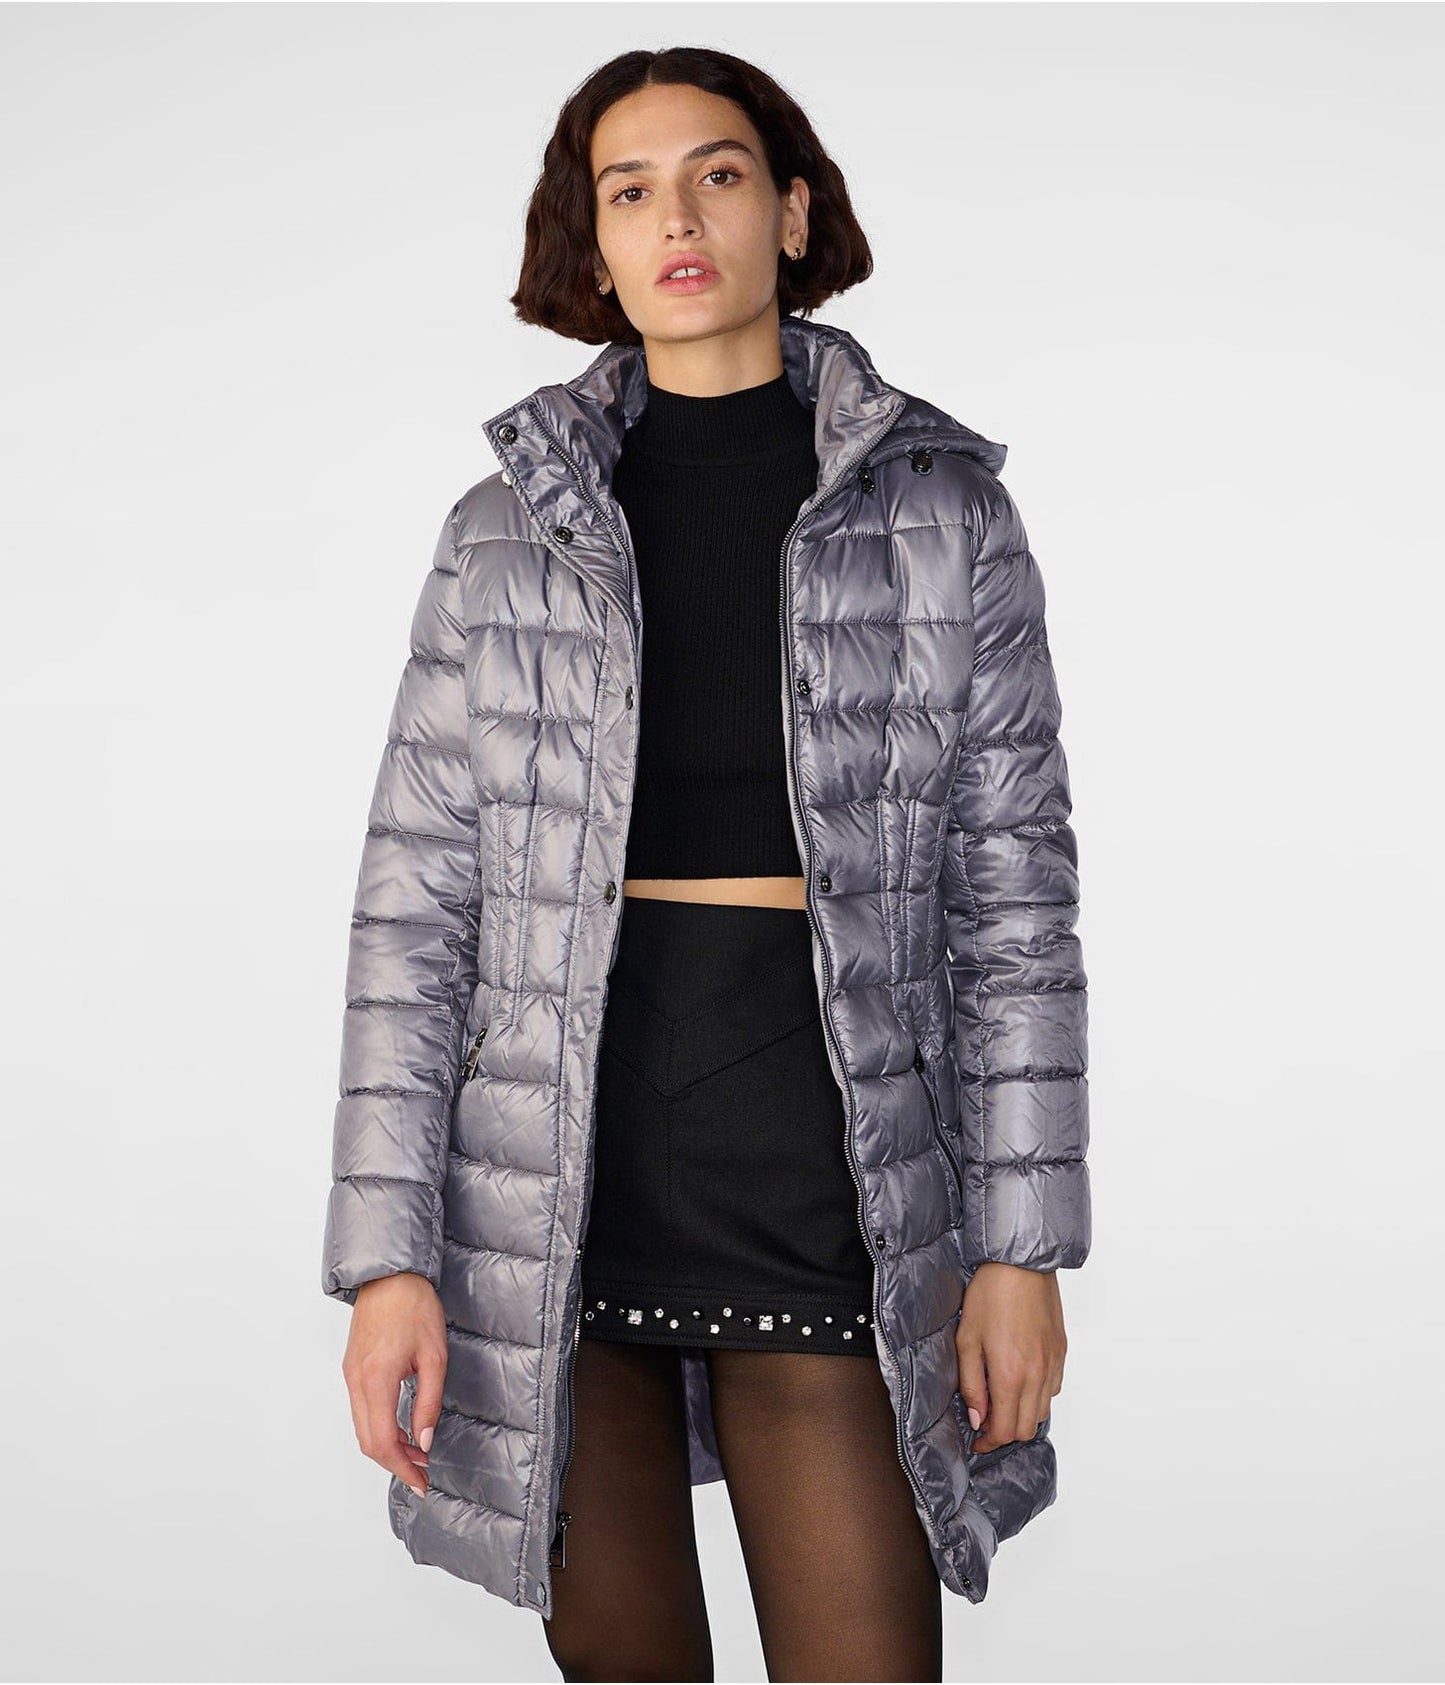 Women's Quilted Puffer Coat In Gray With Hood